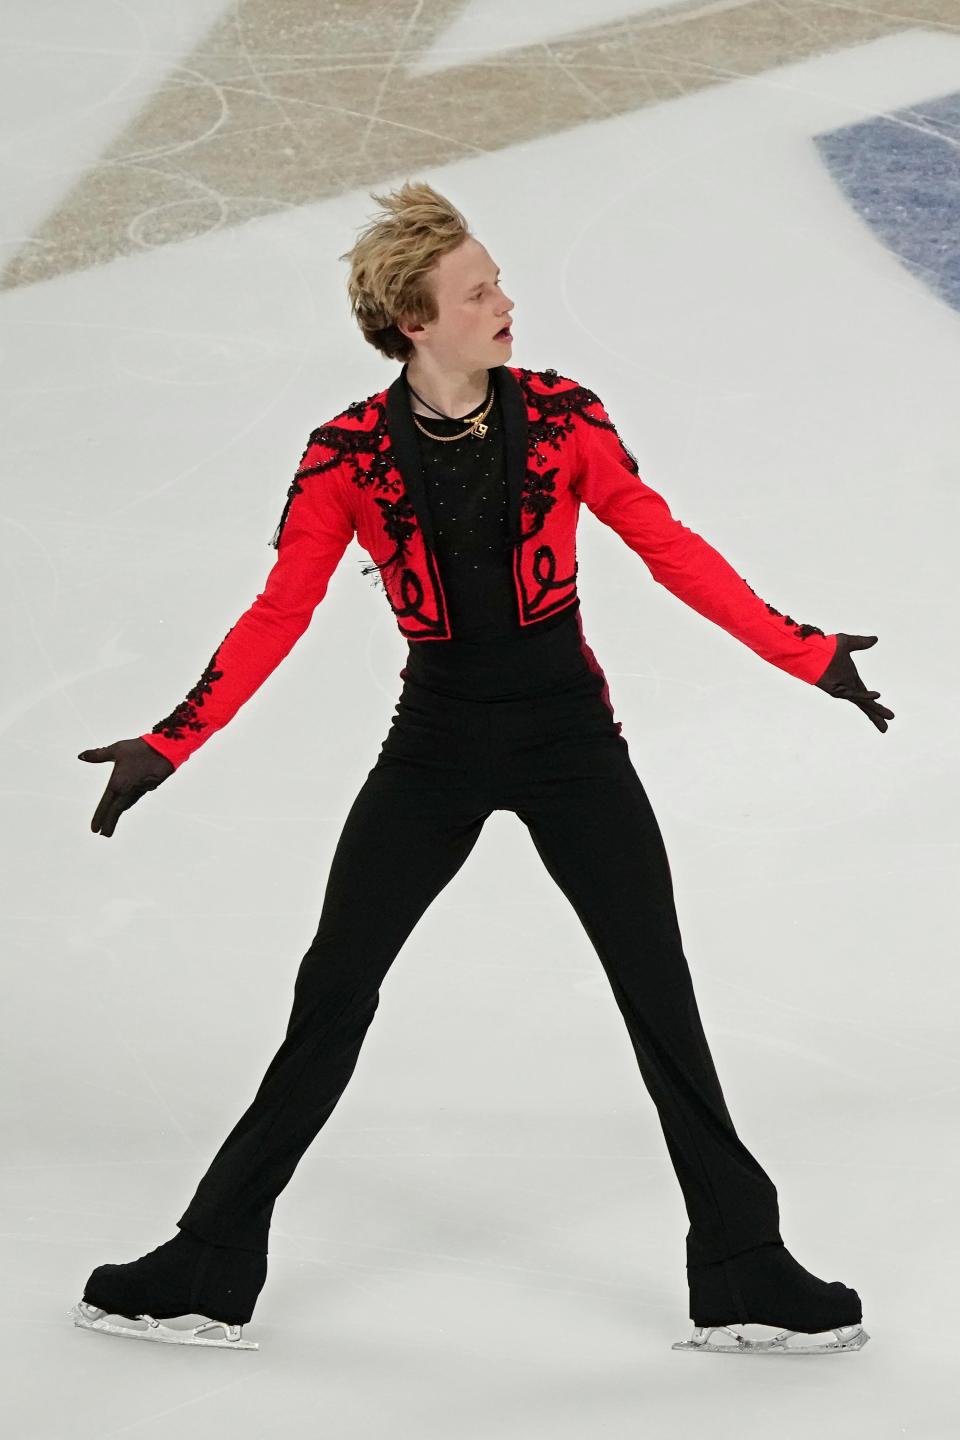 Ilia Malinin garnered an almost 20-point lead after the men's short program during the 2024 U.S. Figure Skating Championships.